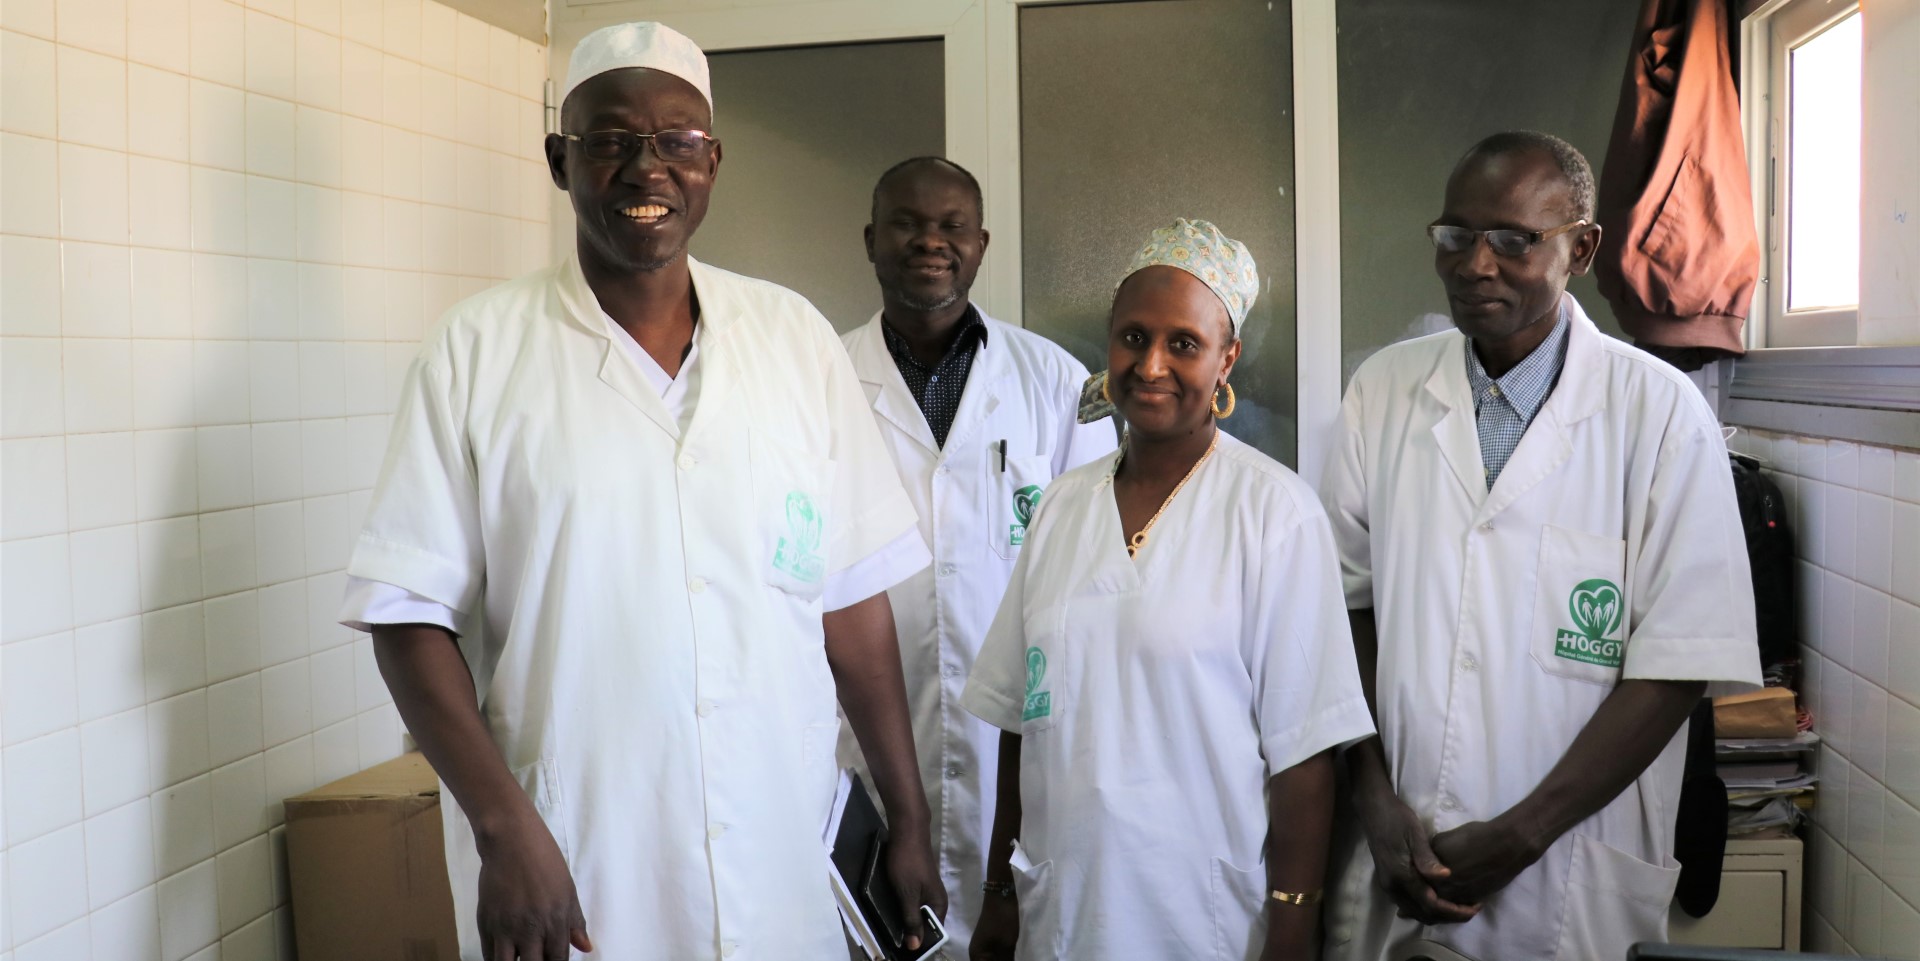 Four healthcare workers smiling and posing for a photo.